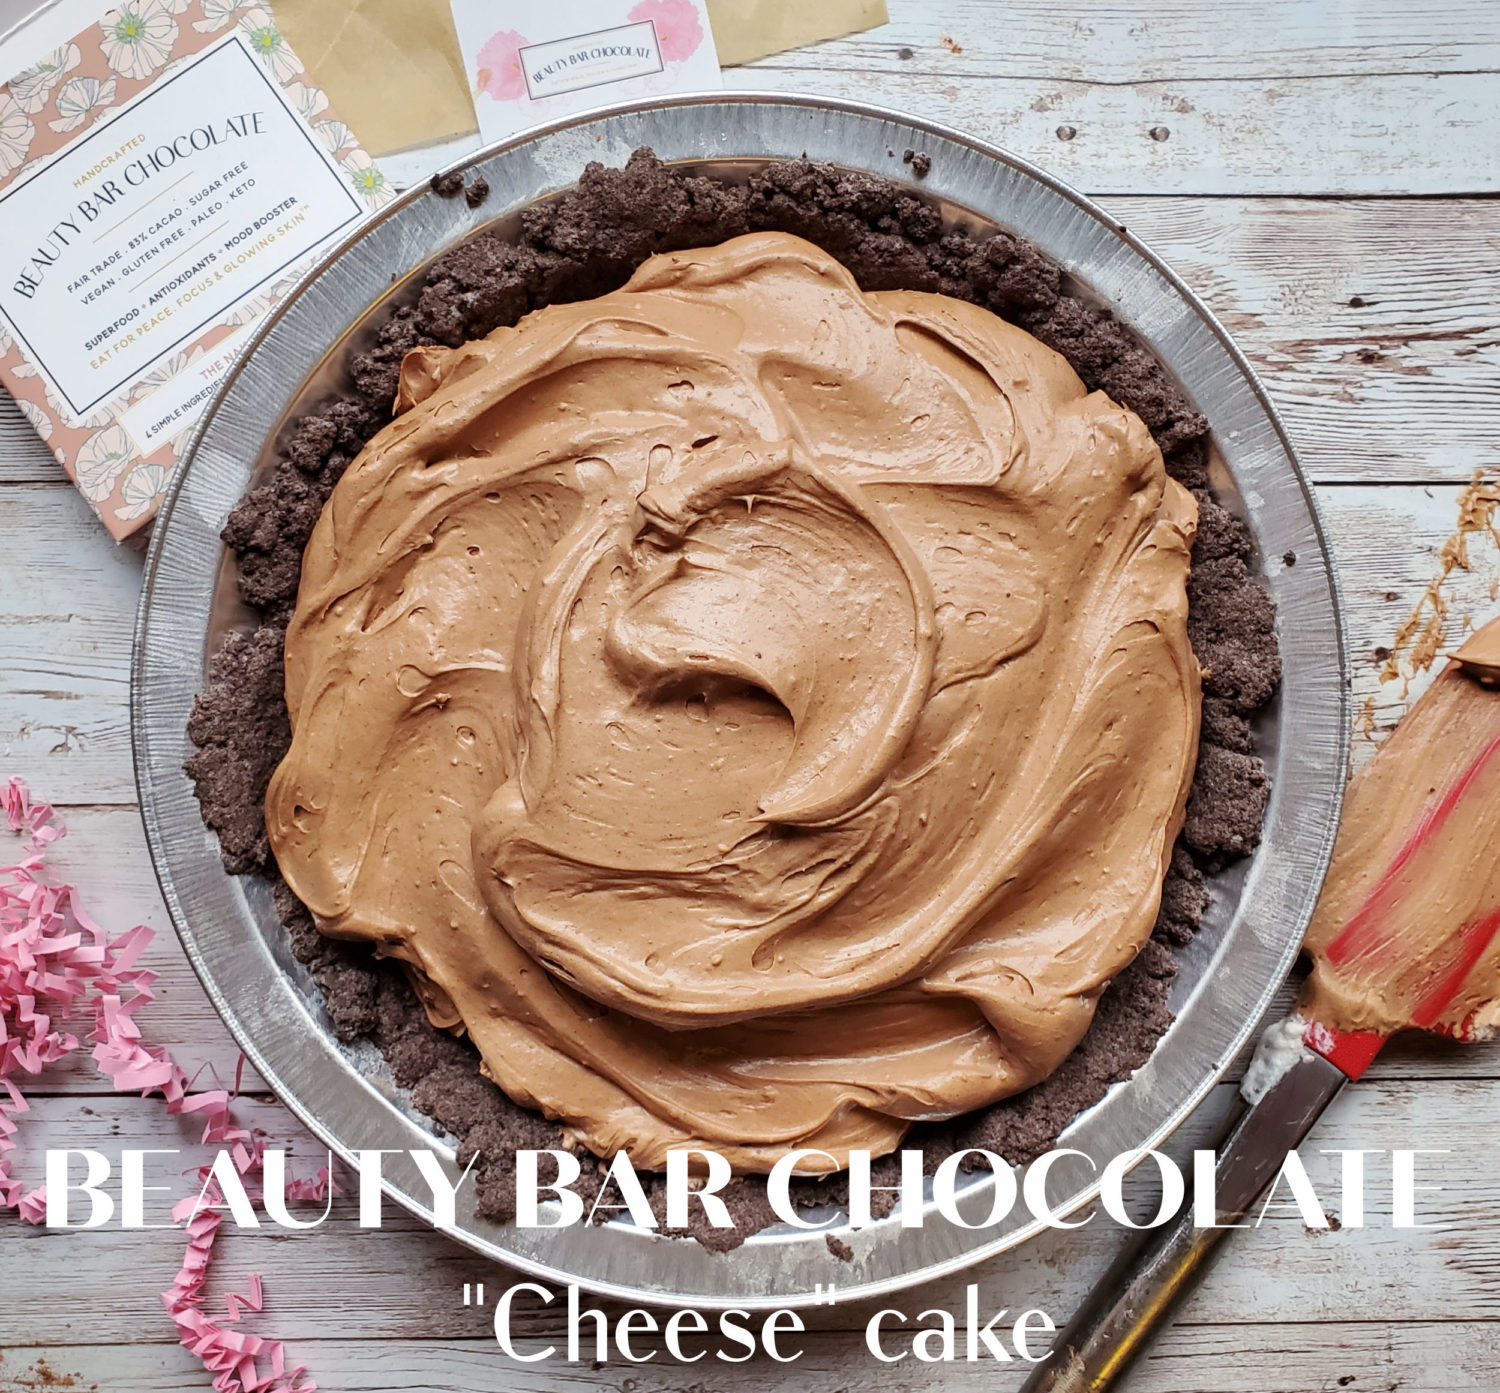 Beauty Bar Chocolate "Cheese" cake: so creamy & delicious it's hard to believe it's vegan, gluten-free, & good for your skin!